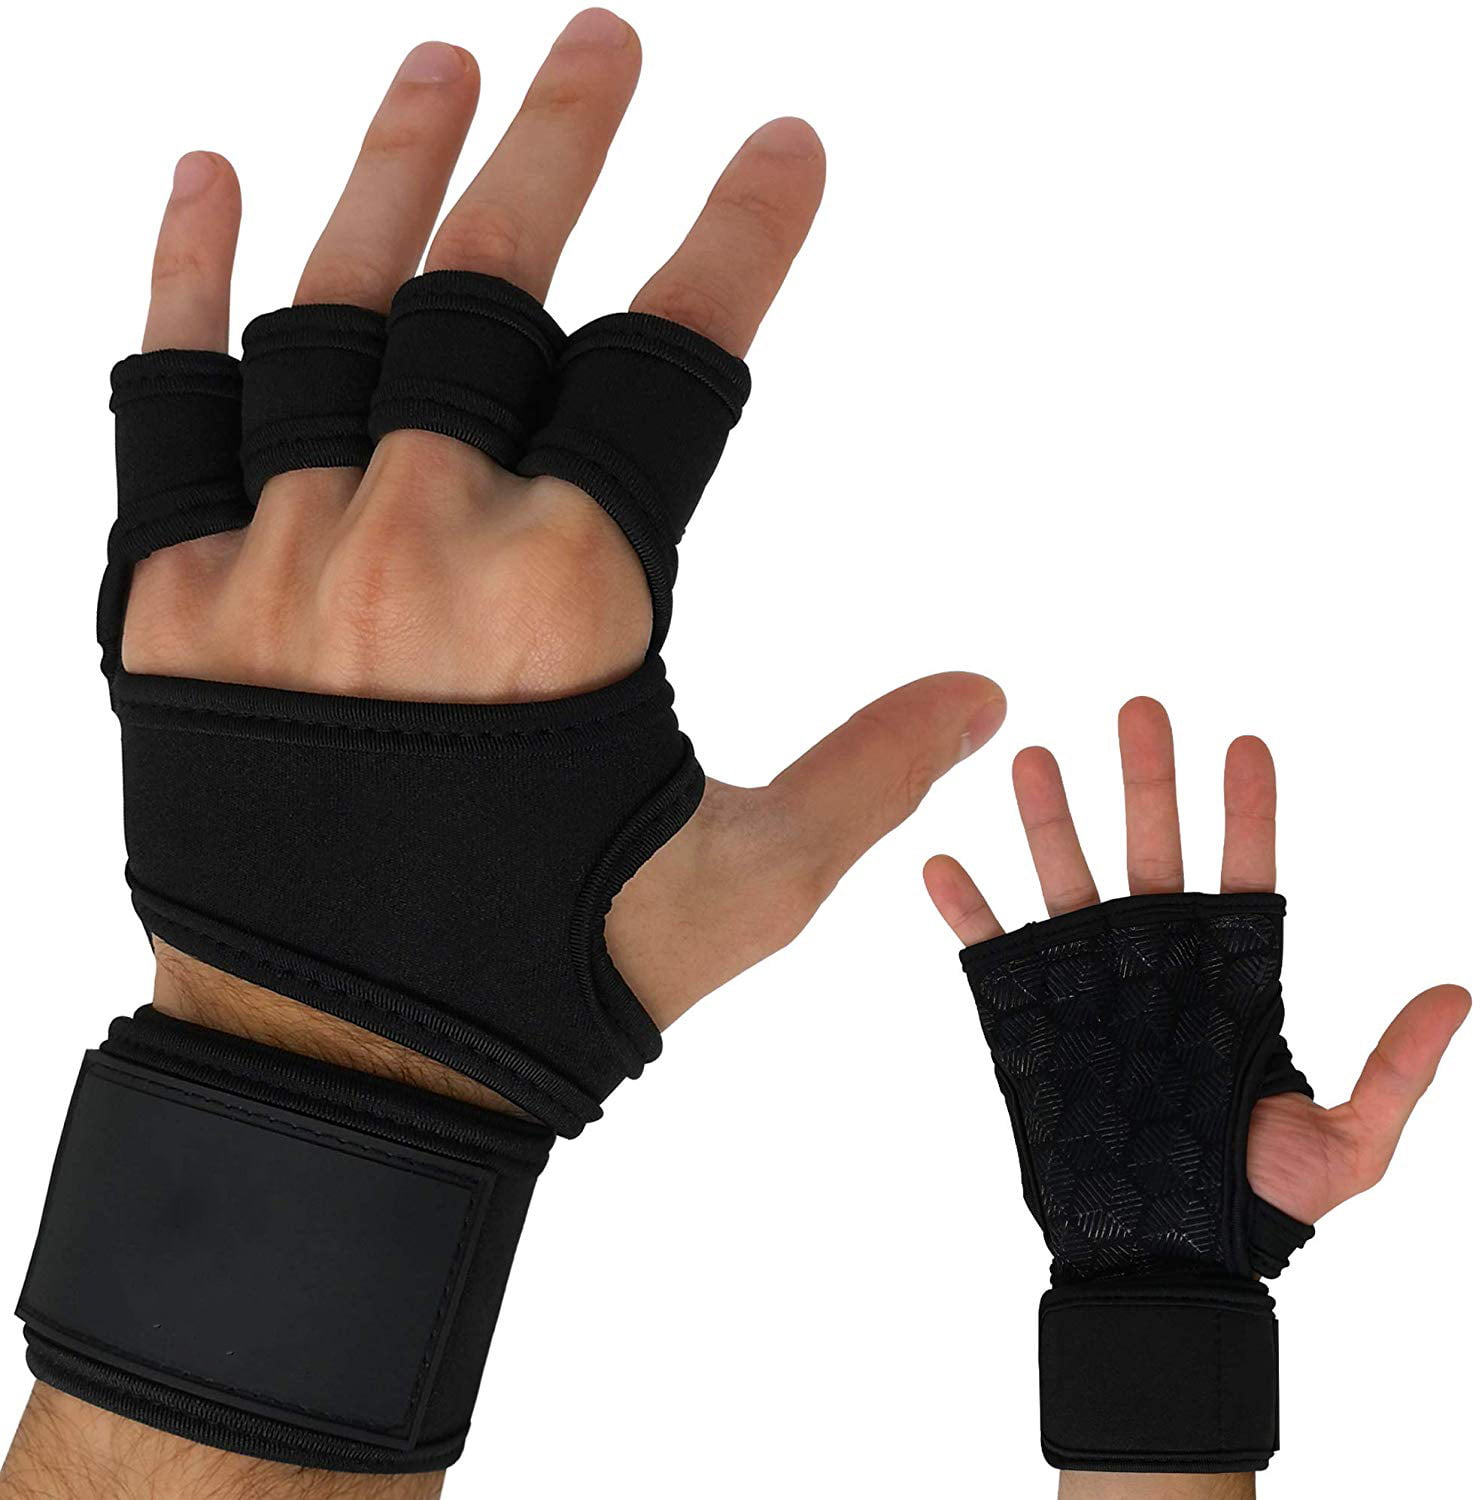 Cross Training New Ventilated Weight Lifting Workout Gloves with Built-in Wrist Wraps for Men and Women Hand Support & Weightlifting. Great for Gym Fitness 